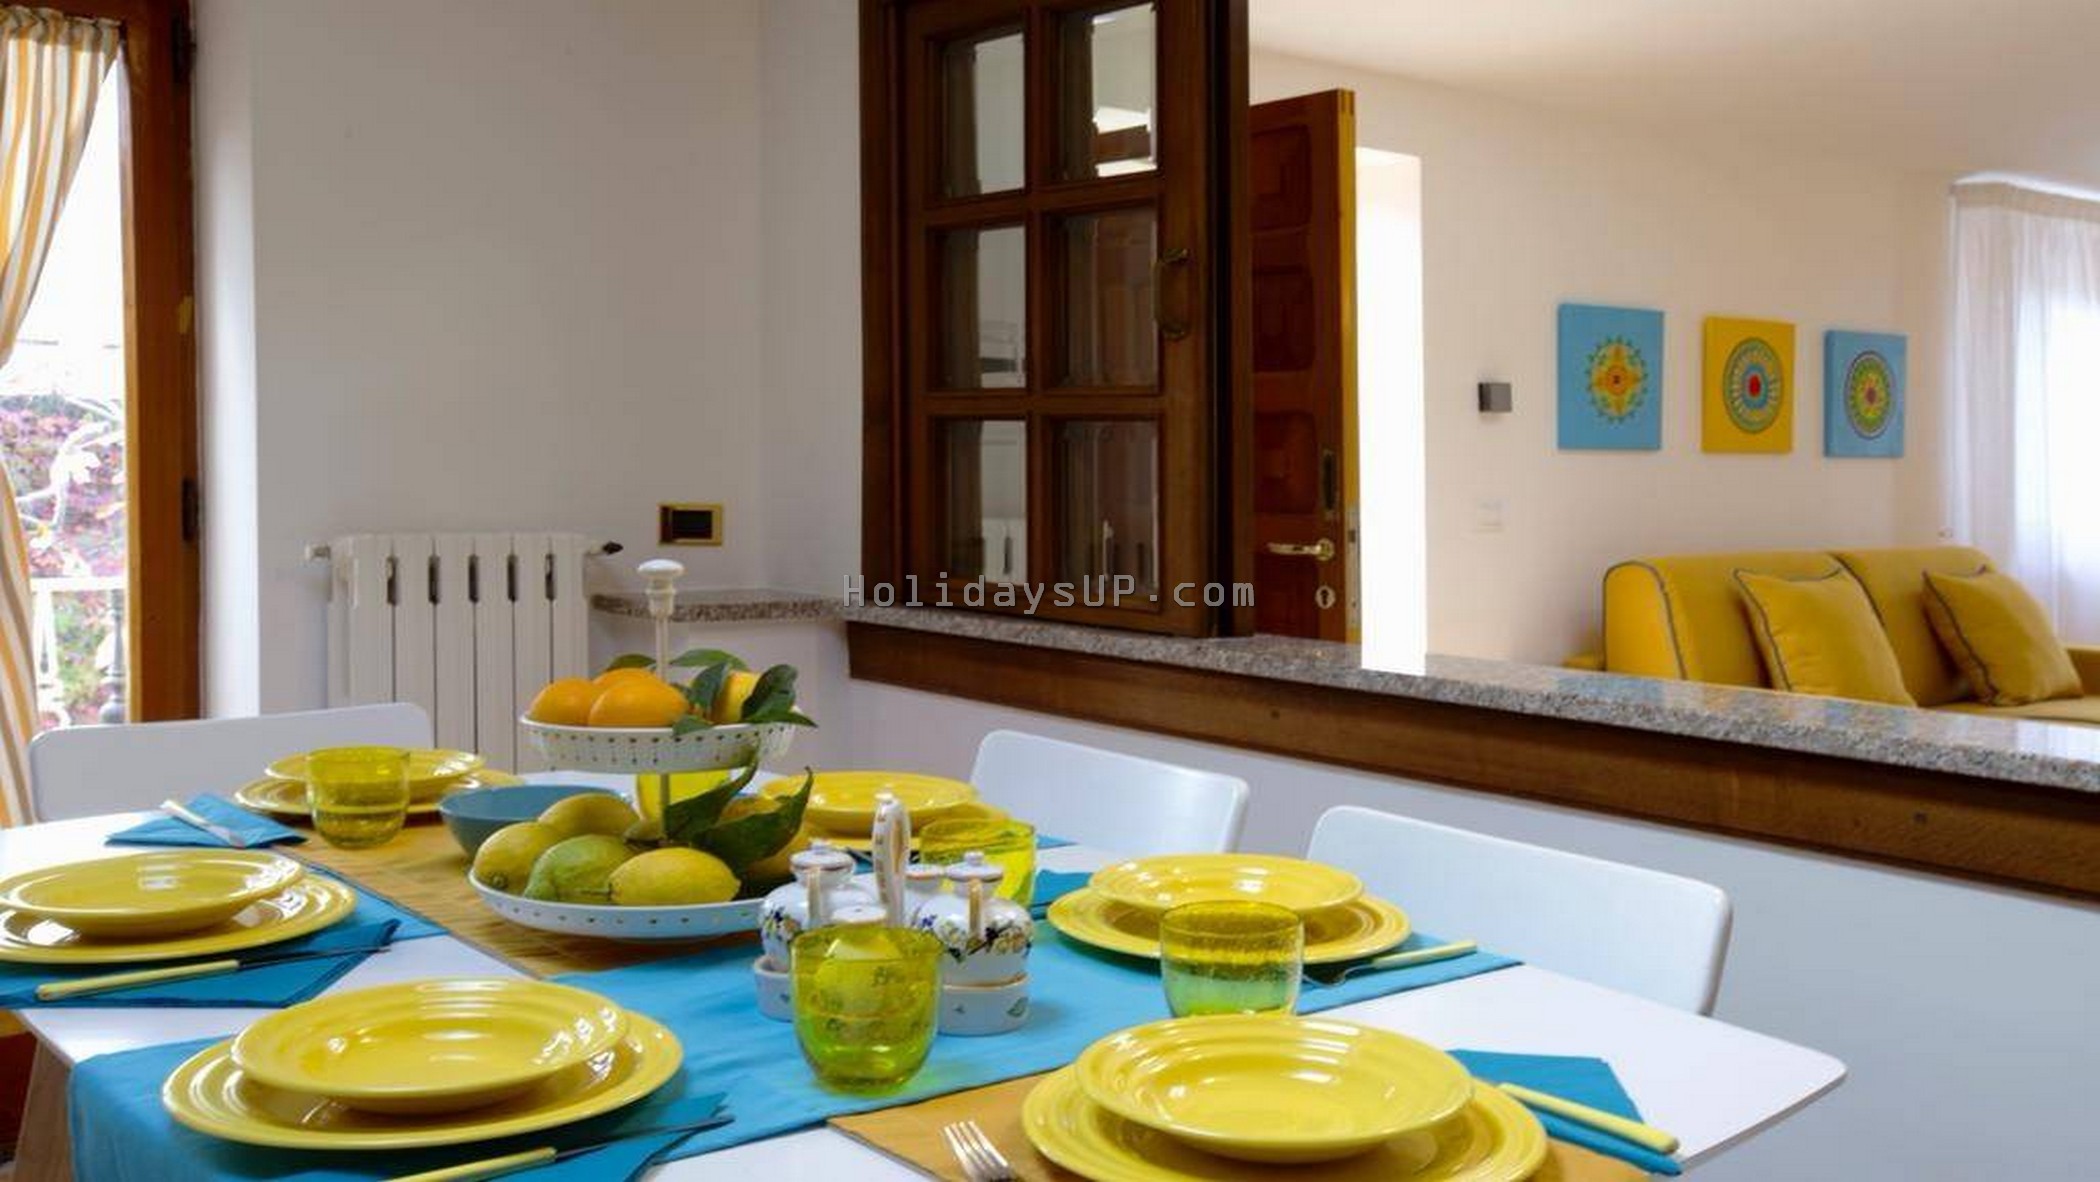 Dining and kitchen well equipped at Casa Mariandre A Sorrento